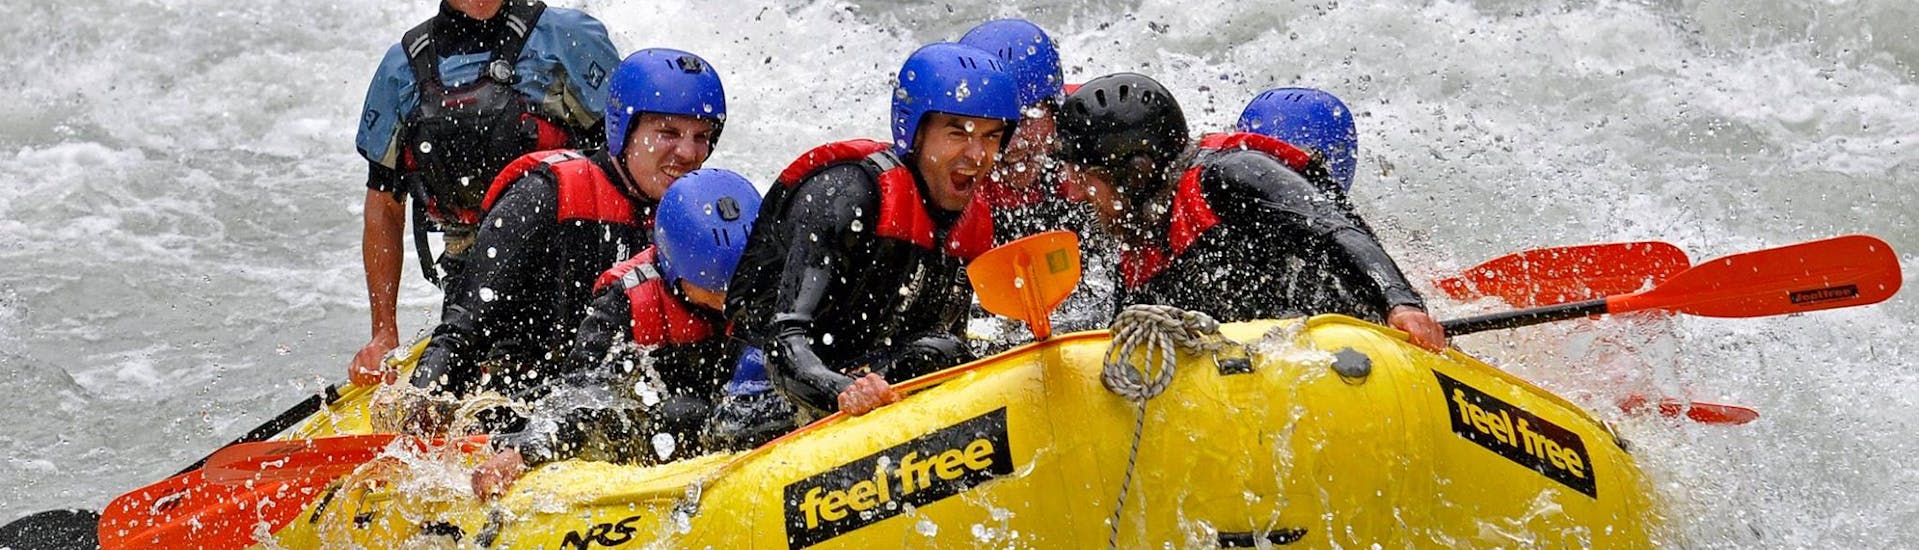 Rafting on Ötztaler Ache - White Water Professional Tour with feelfree Outdoor Professionals Ötztal.